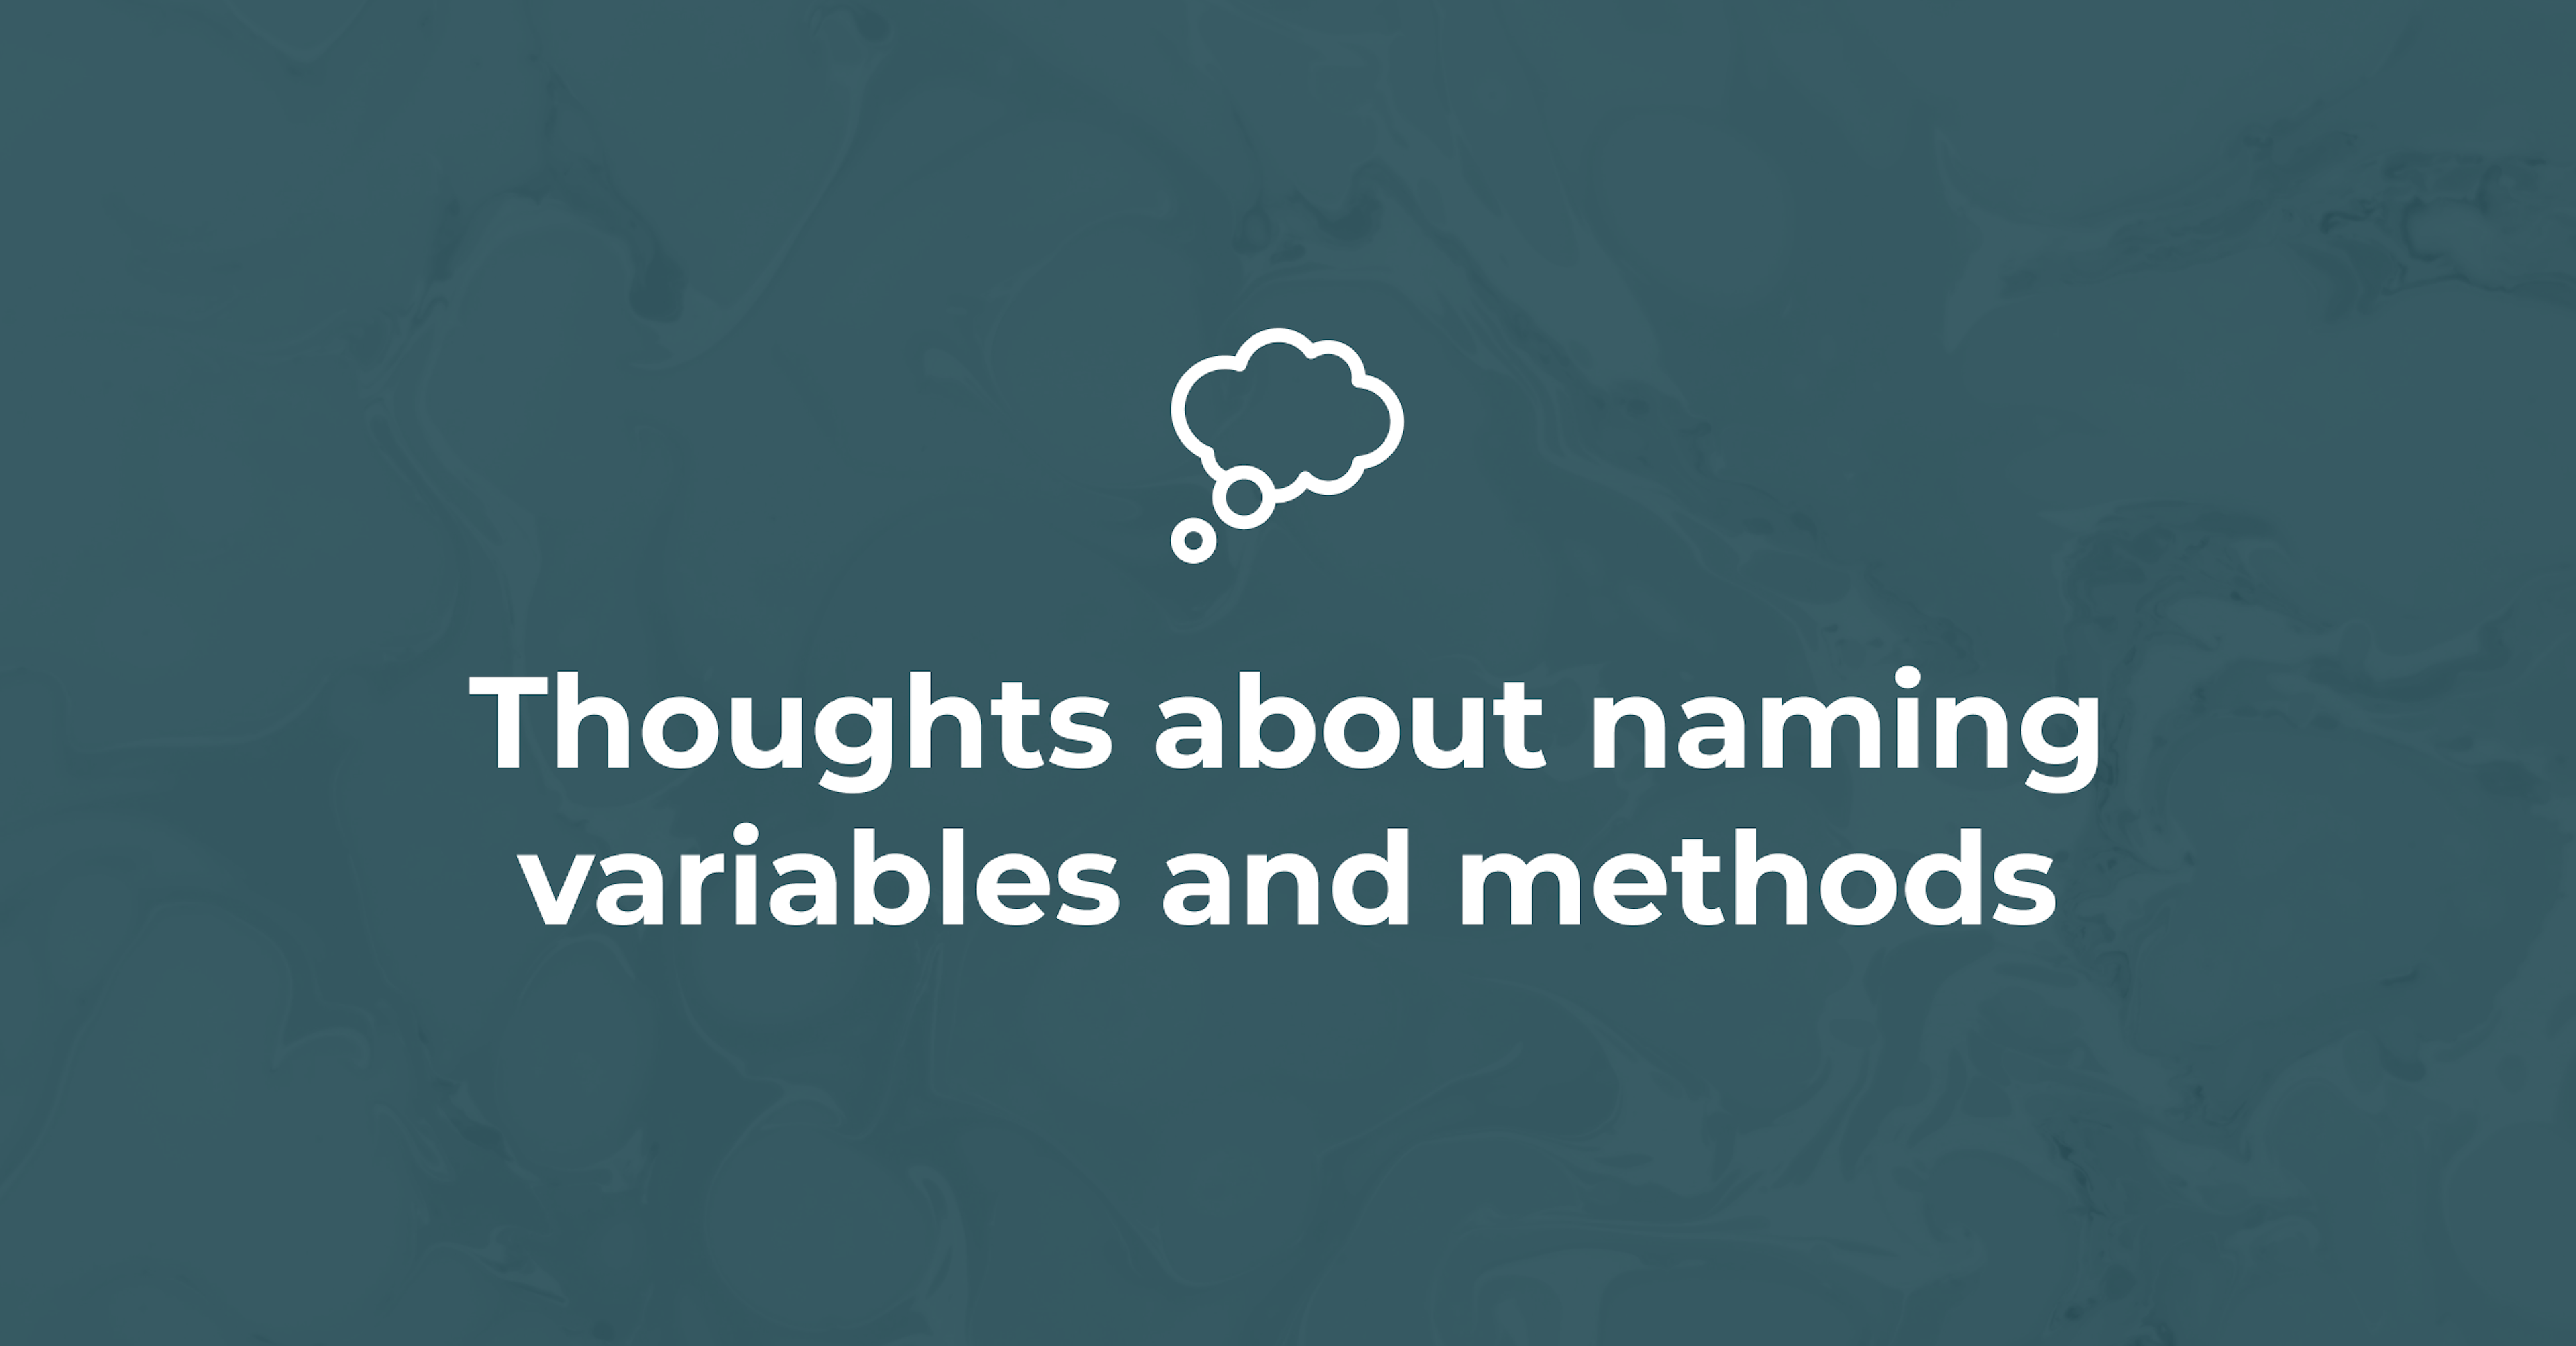 Thoughts about naming variables and methods